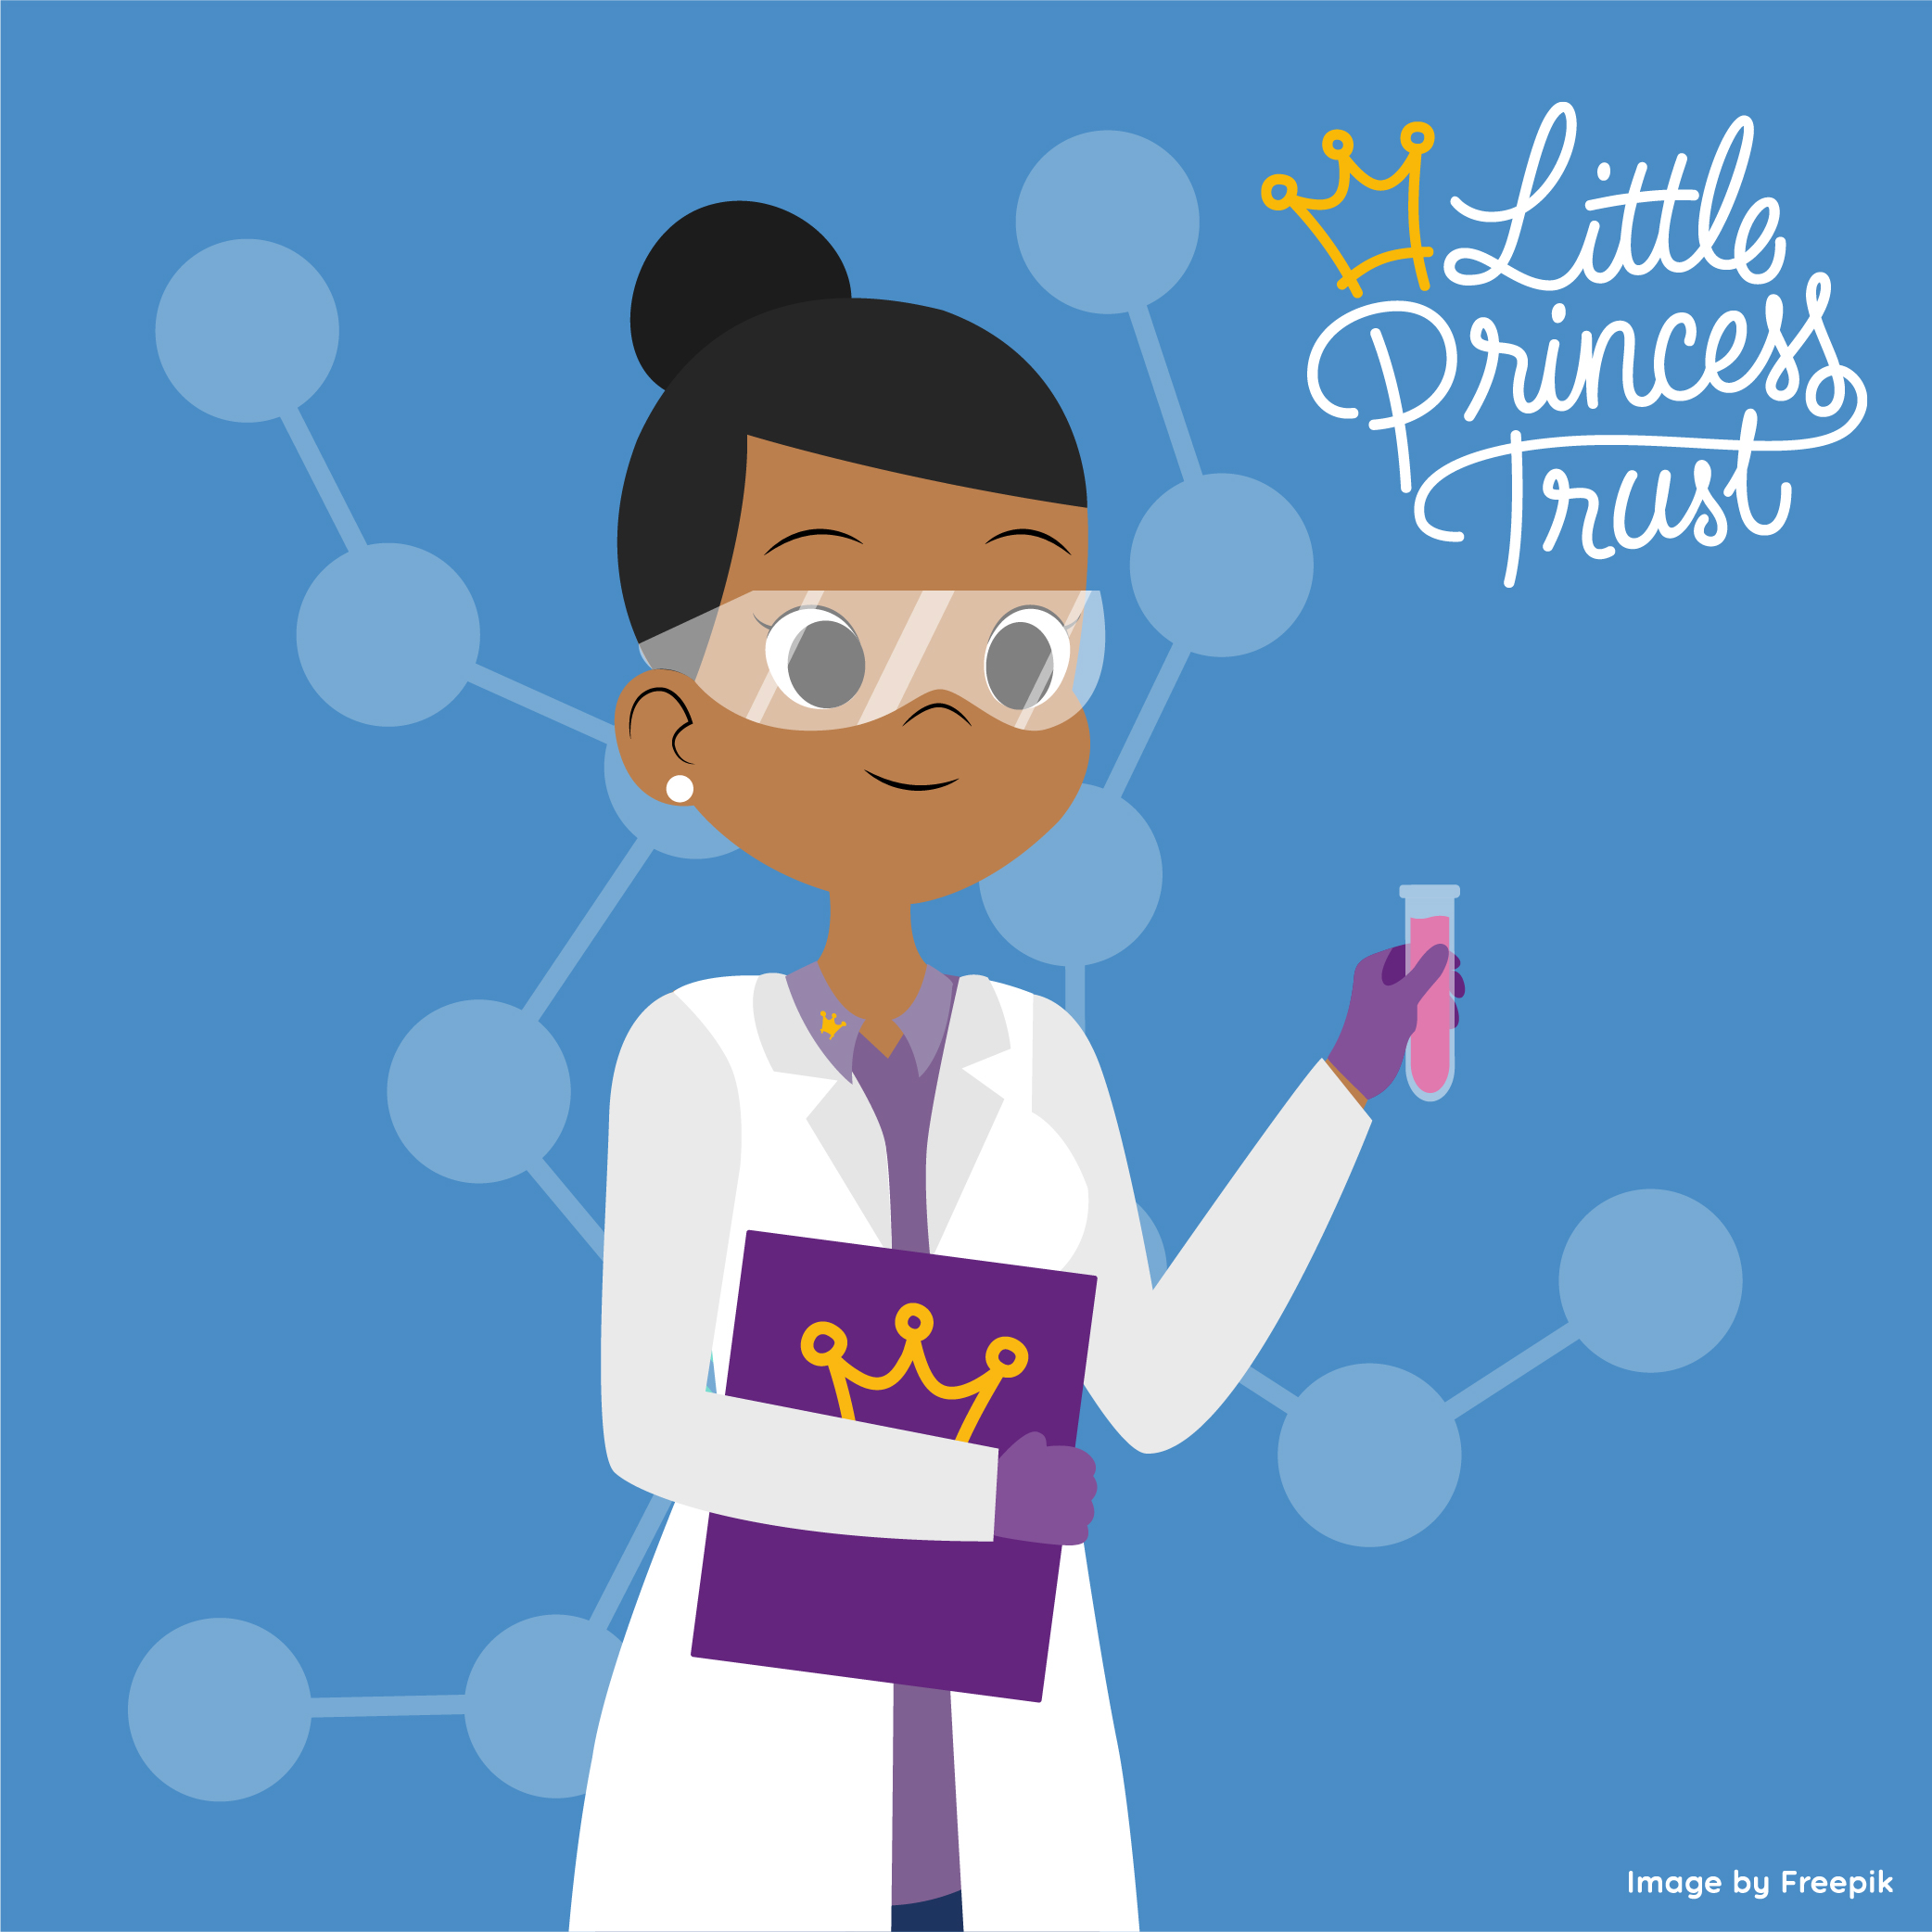 The Little Princess Trust funds researchers searching for kinder and more effective treatments for all childhood cancers.